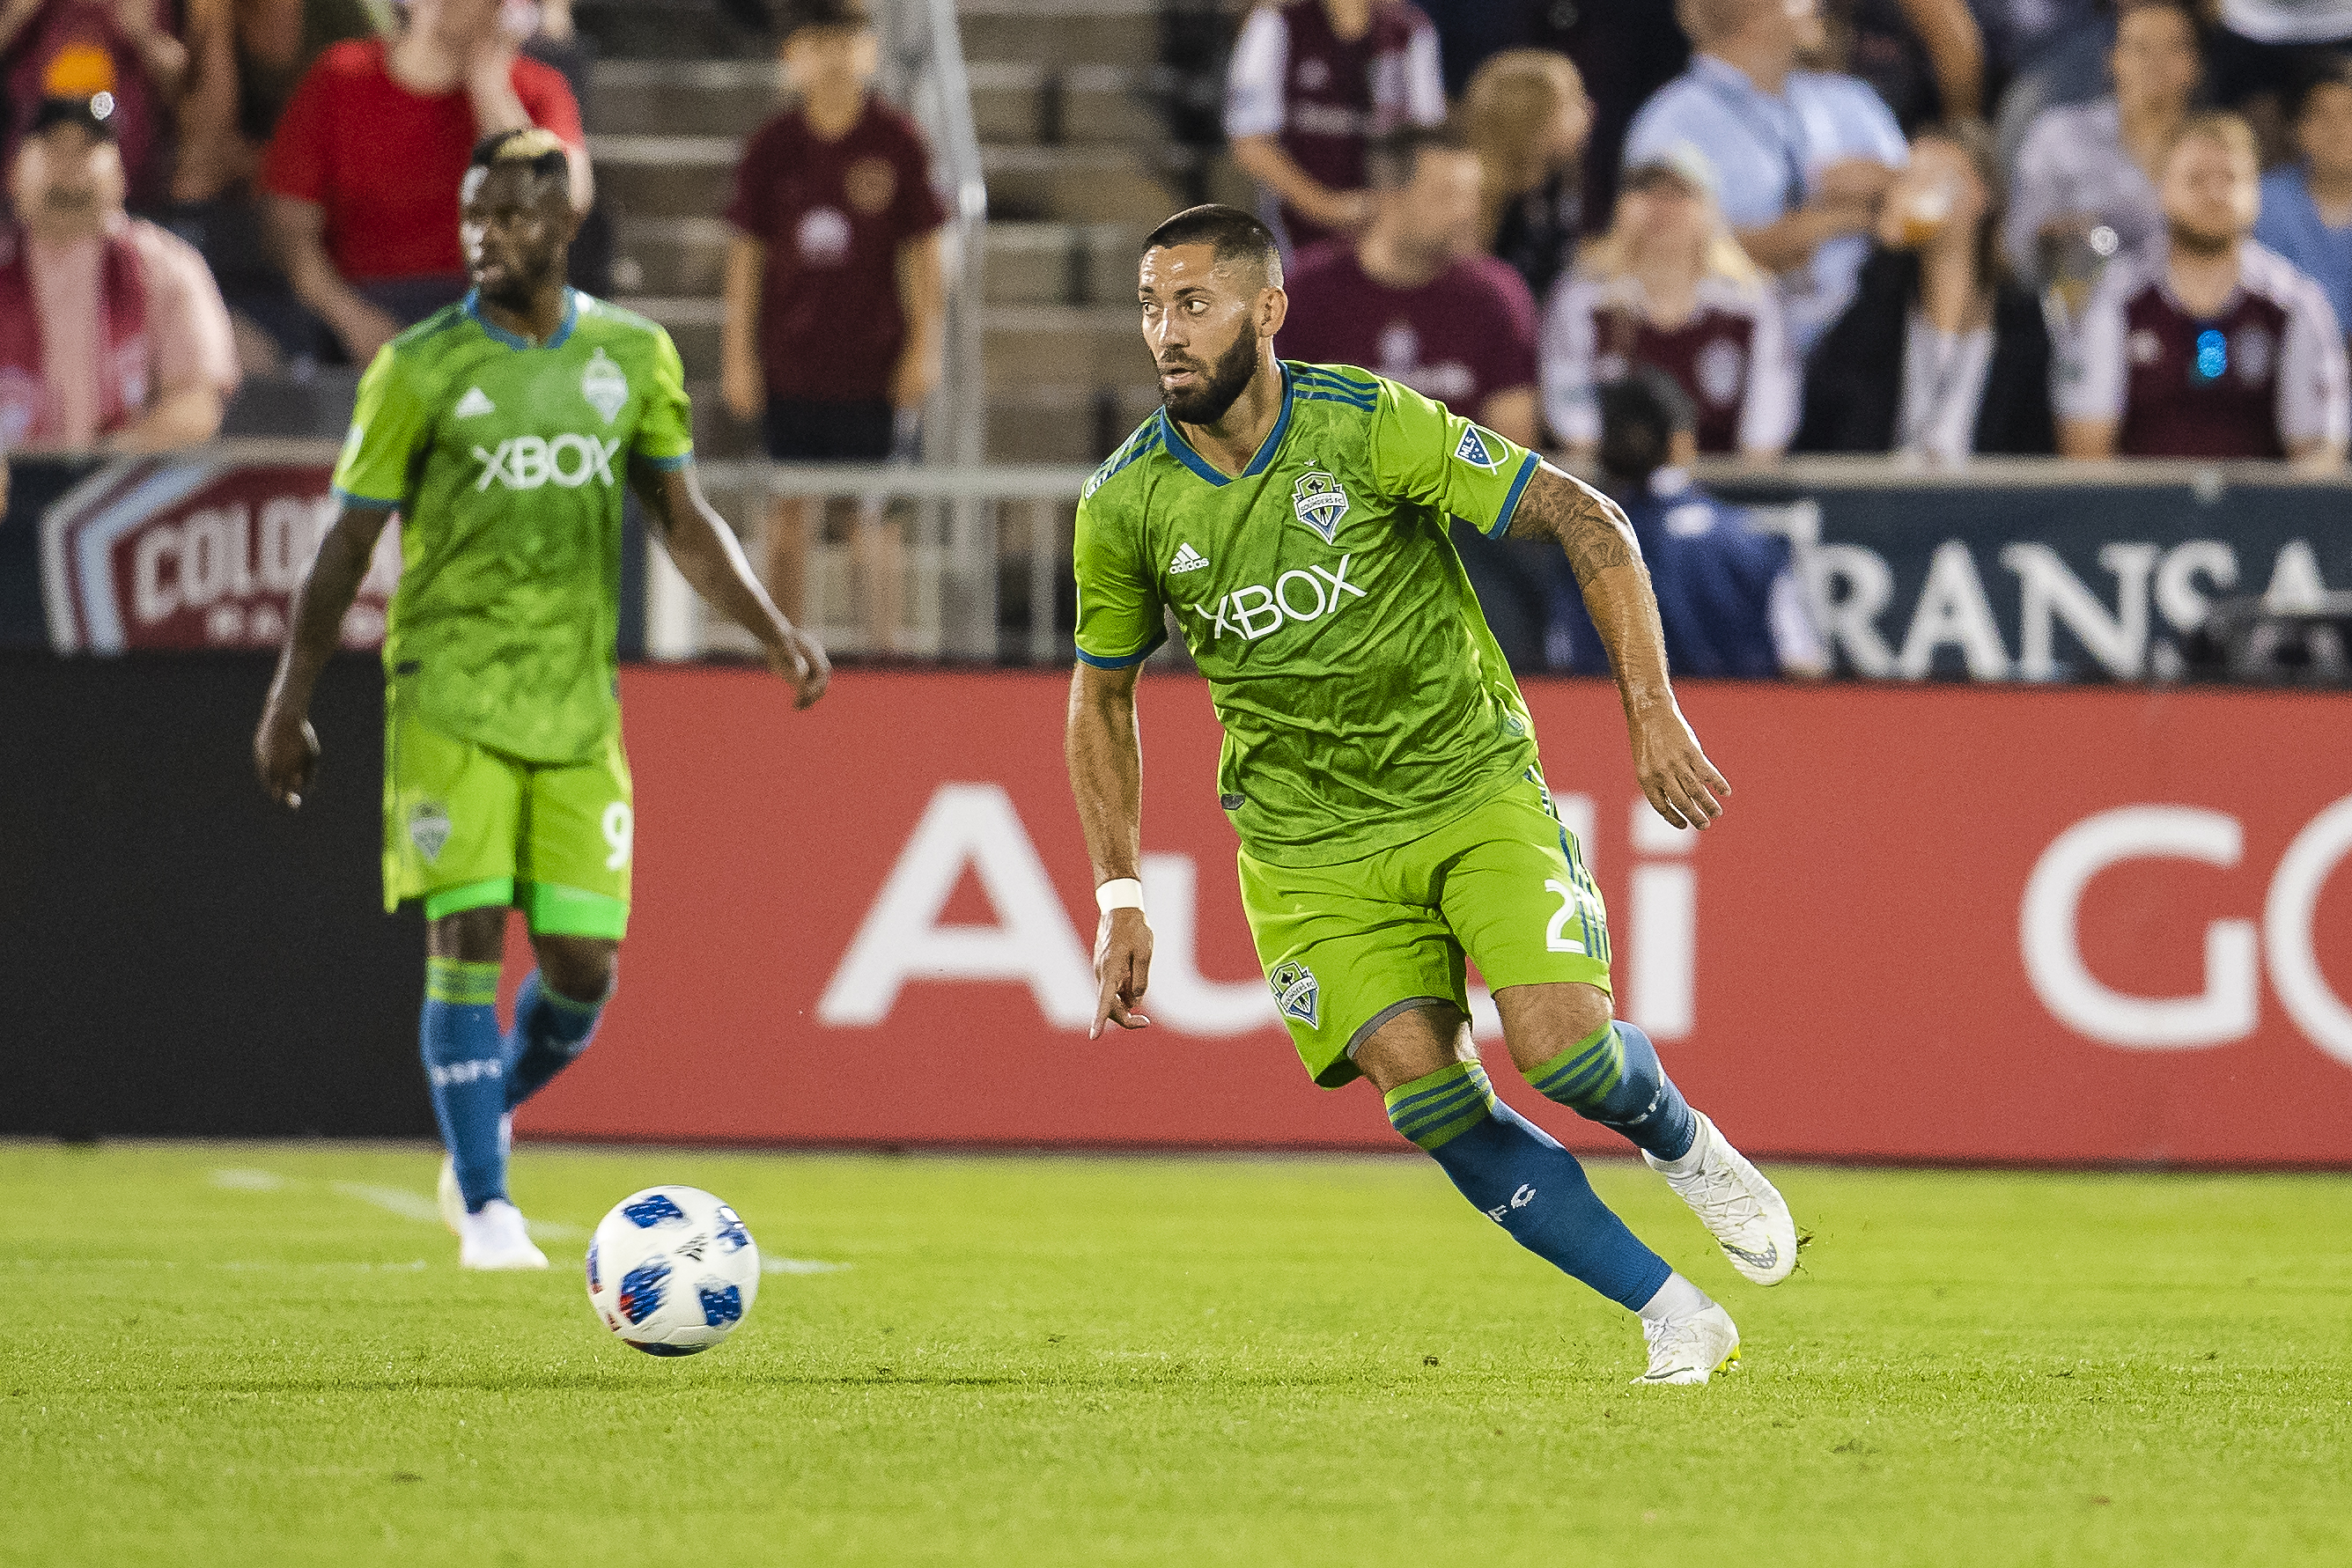 US striker Clint Dempsey retires from soccer